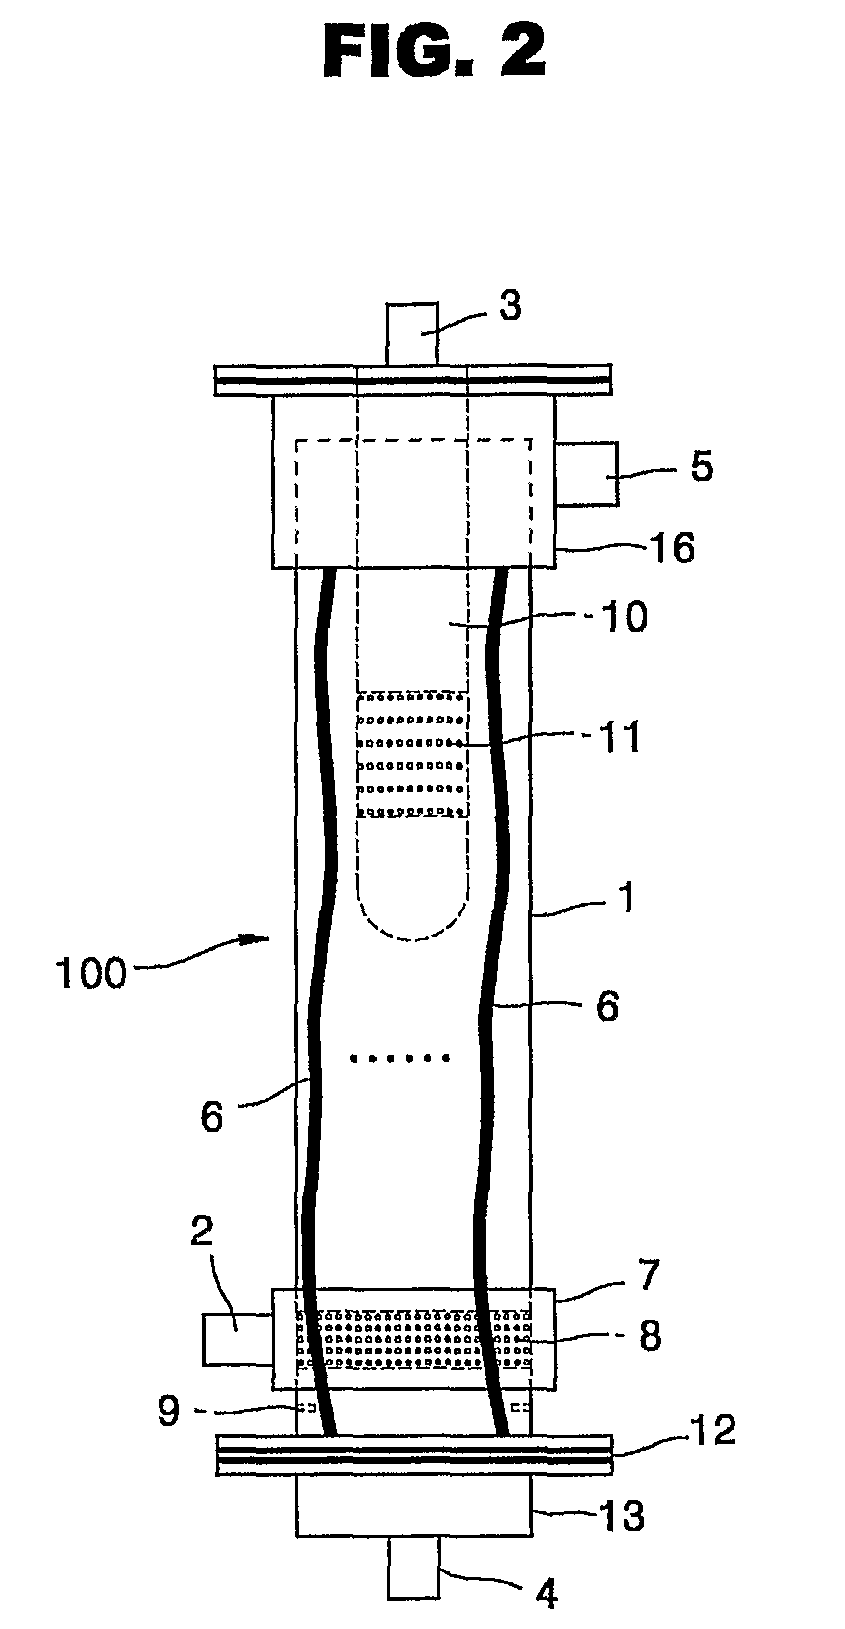 Fine filtering apparatus controllable packing density using flexible fiber